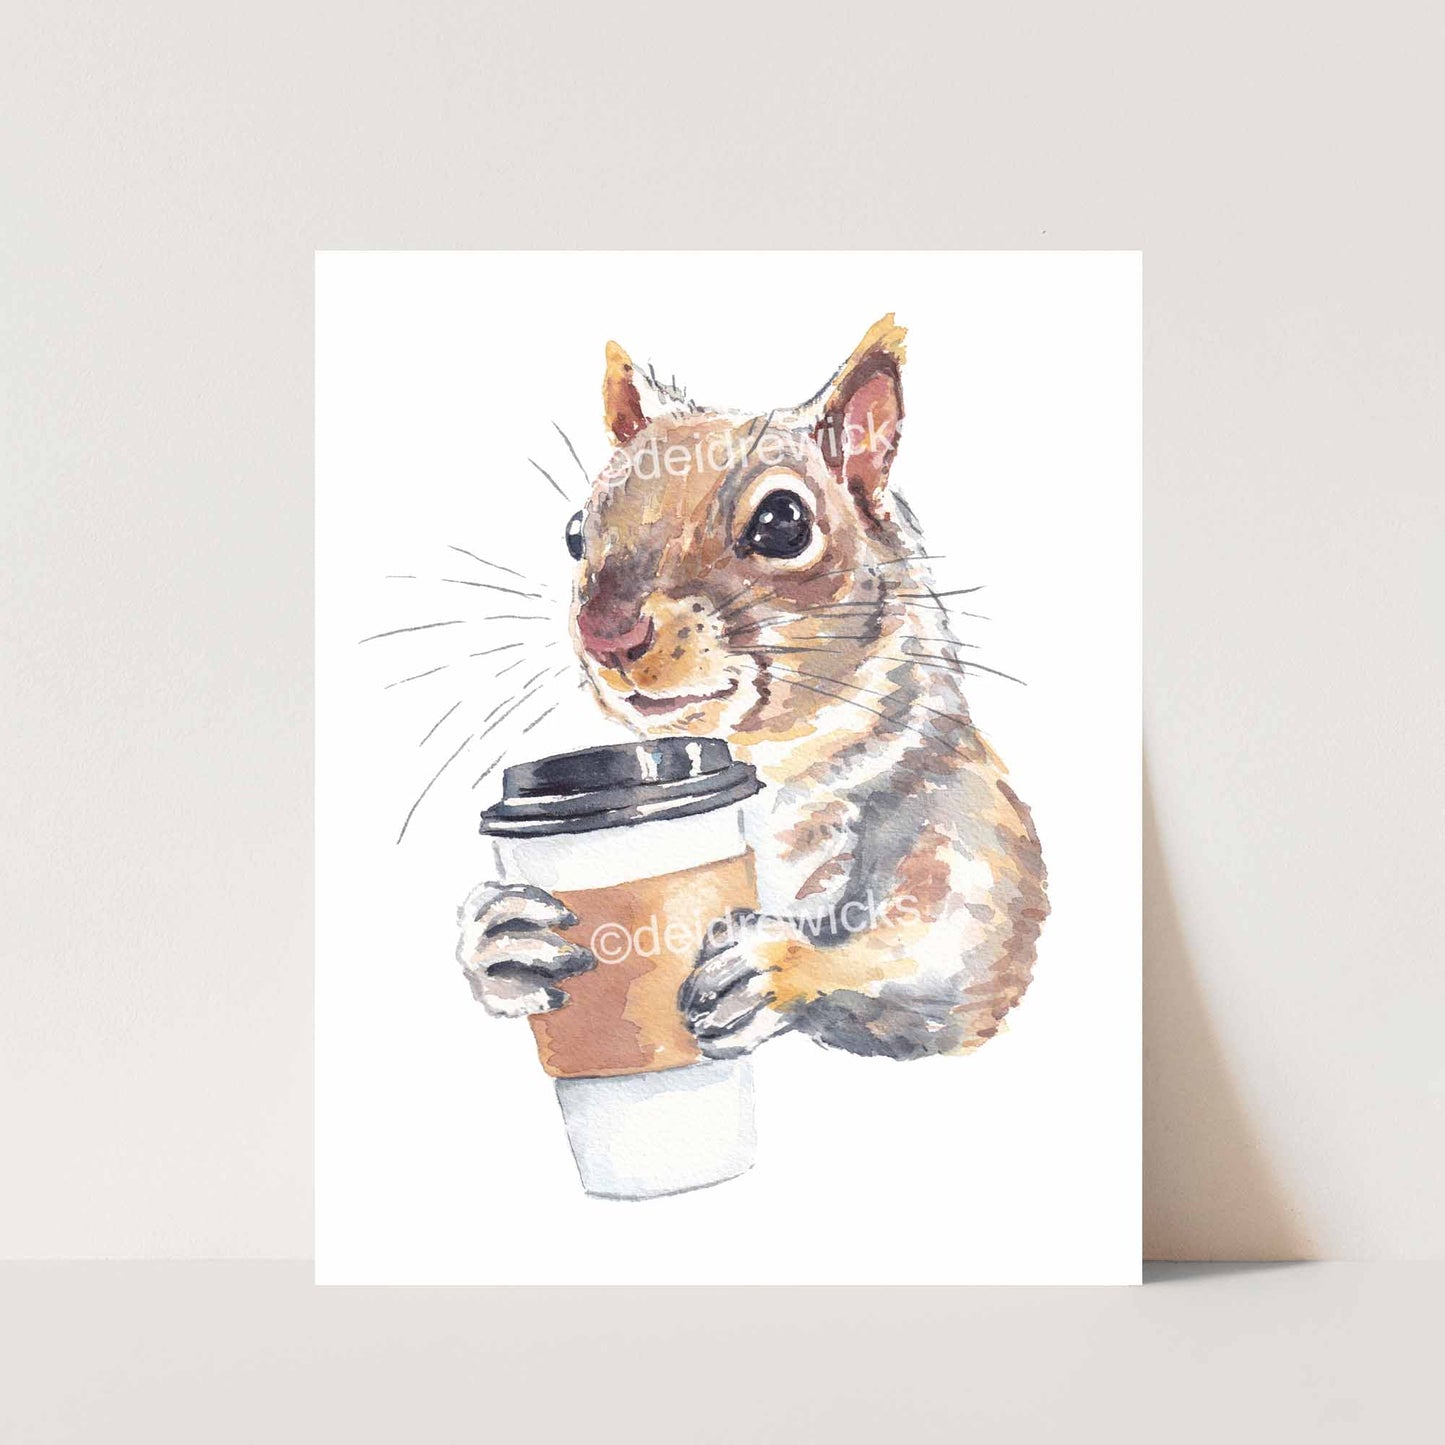 Squirrel watercolour print of a grey squirrel holding a large take-out coffee. Original painting by Water In My Paint